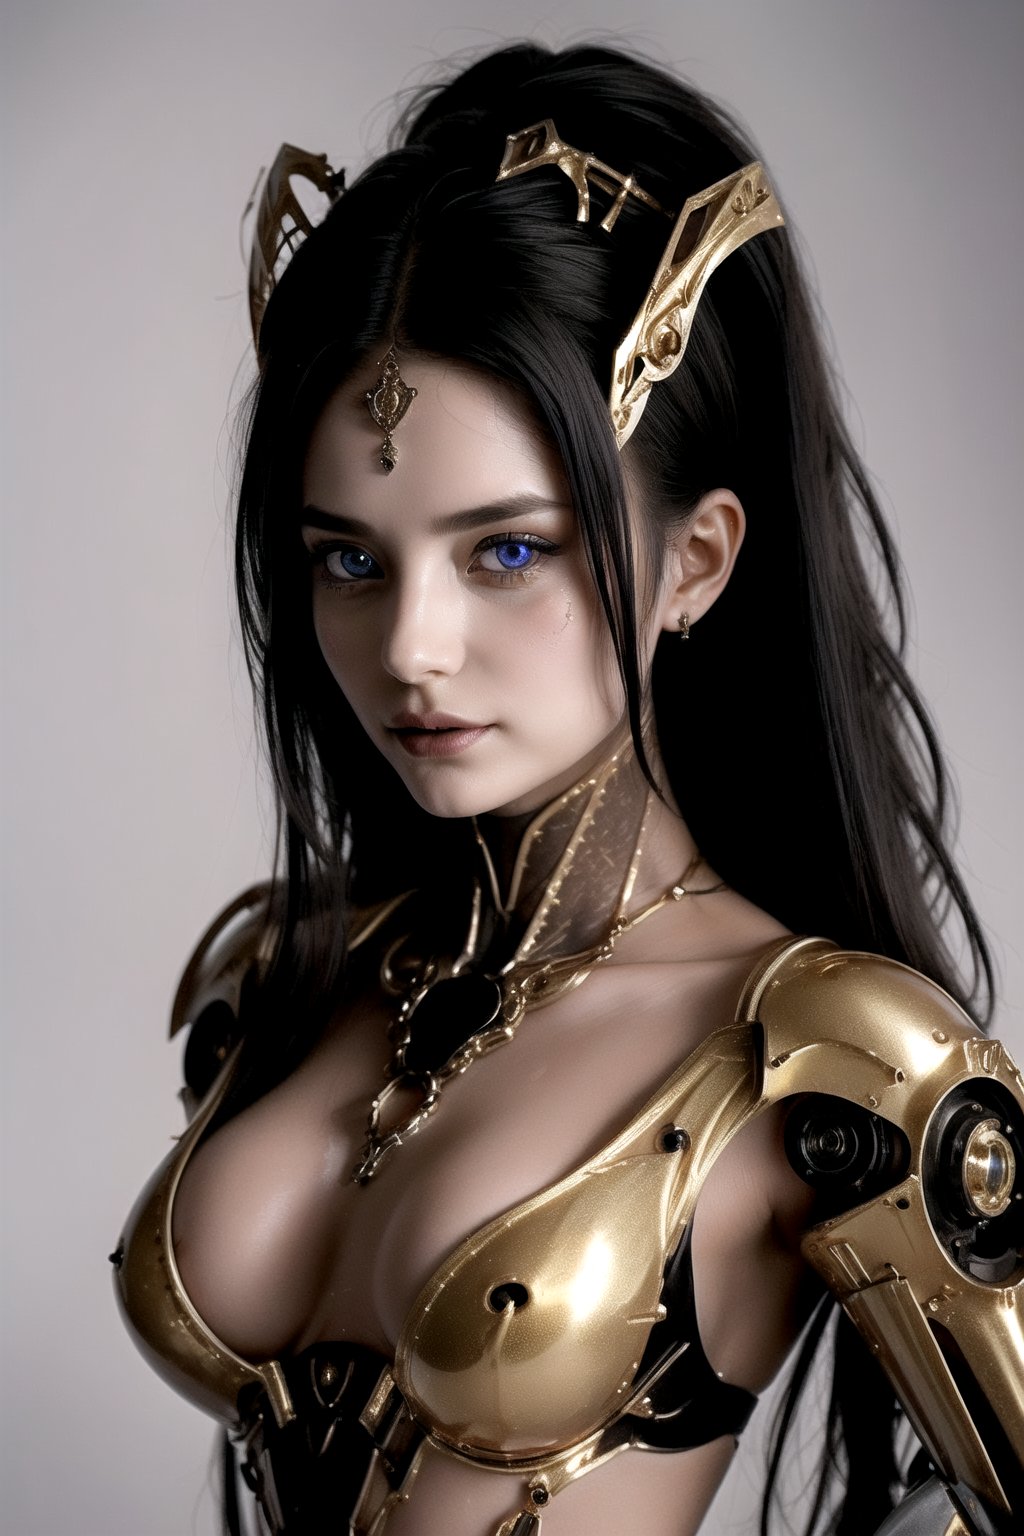 (photorealistic: 1.2),  good anathomy, good proportions, Her body is made of metals and carbon fiber polished with a golden color, despite being a metallic body she still maintains her feminine face, with delicate features, eyes as blue as the sky, full lips, face gentle. Extremely long hair, very straight hair. Her head is topped with an intricate headdress adorned with sparkling crystals and delicate filigree, adding an air of royalty to her already majestic bearing. Her body is filled with mechanized and moving parts as well as some precious stones representing the royal family. each ending in delicate metal fingers or tentacles. The robotic nature of her form is further emphasized by the way she appears to float effortlessly above the ground, her movements fluid and graceful despite the obvious artificiality of her construction. She stands in a dimly lit chamber, the light reflecting off the polished metal surface of her, casting an otherworldly glow around her.,3va,photorealistic,,Detailedface,perfecteyes eyes,purple theme, monochrome